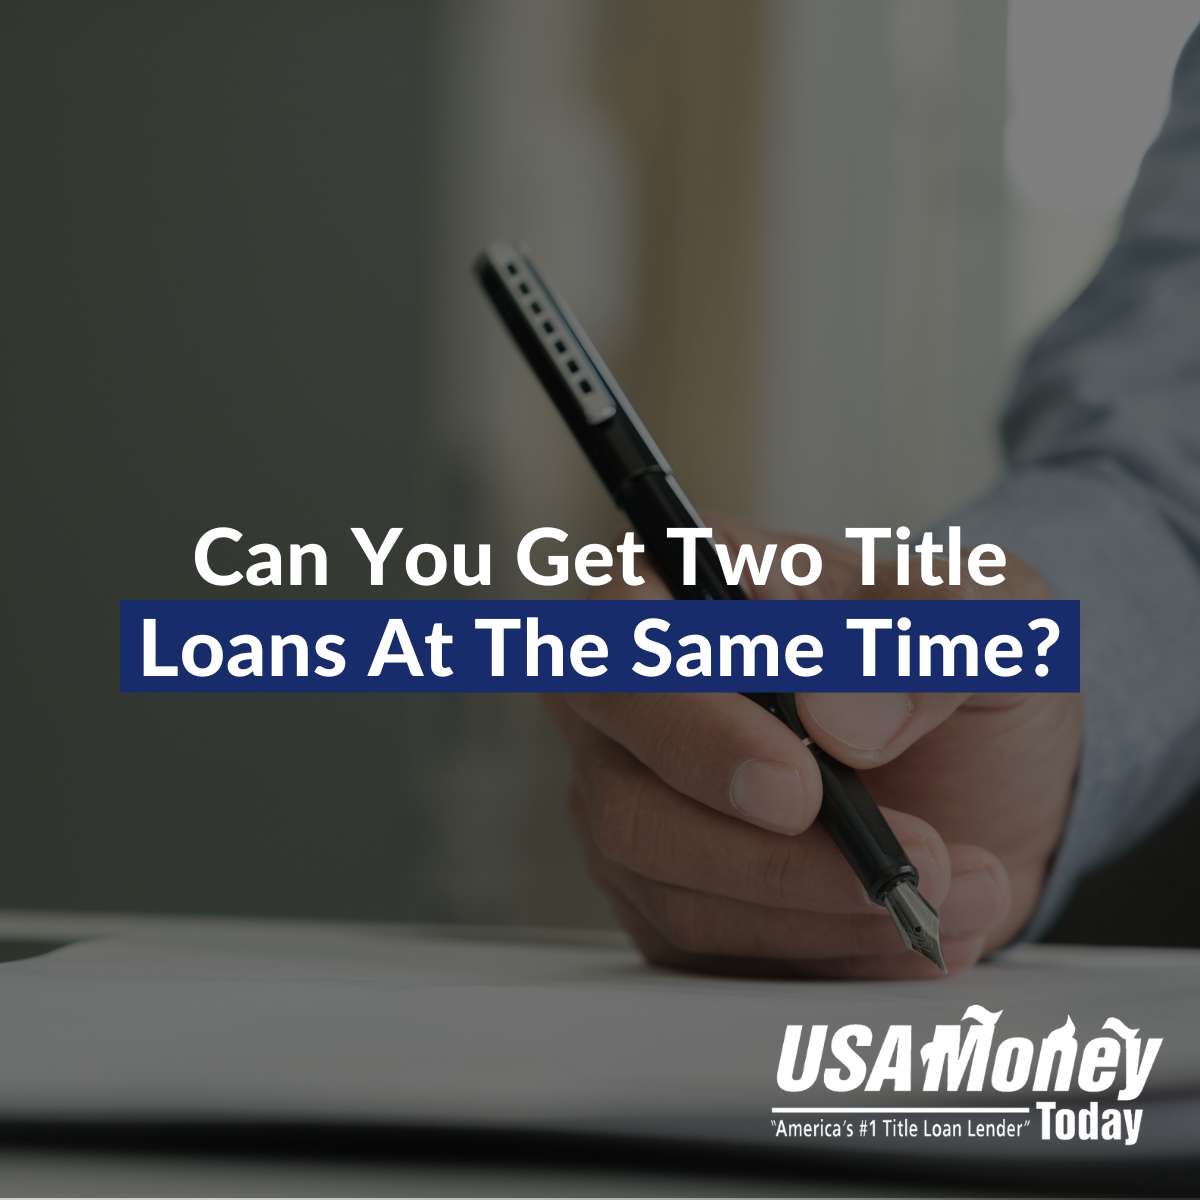 Can You Get Two Title Loans At The Same Time?